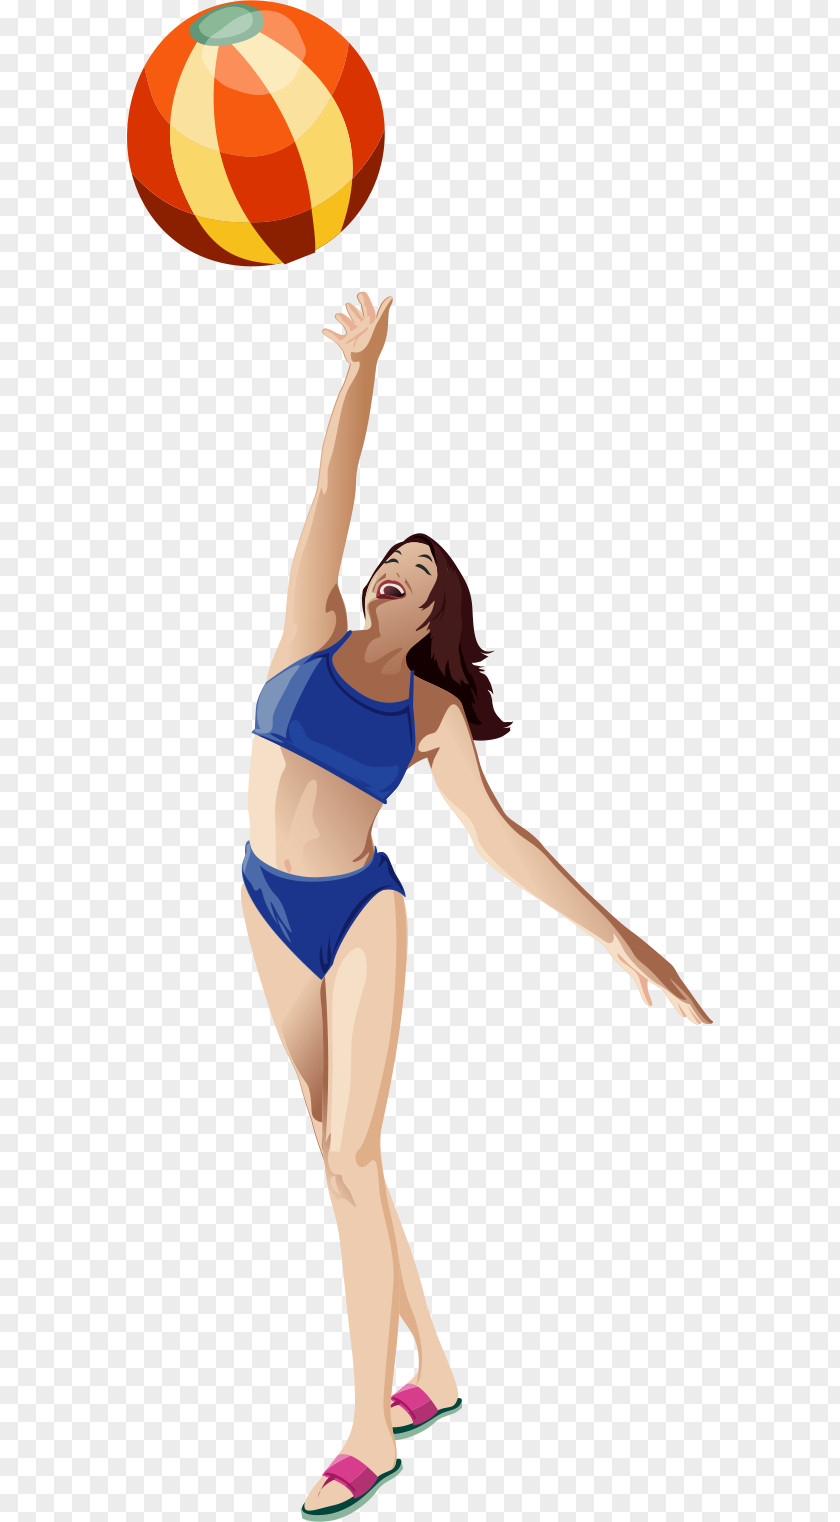 Volleyball Beauty Illustration PNG